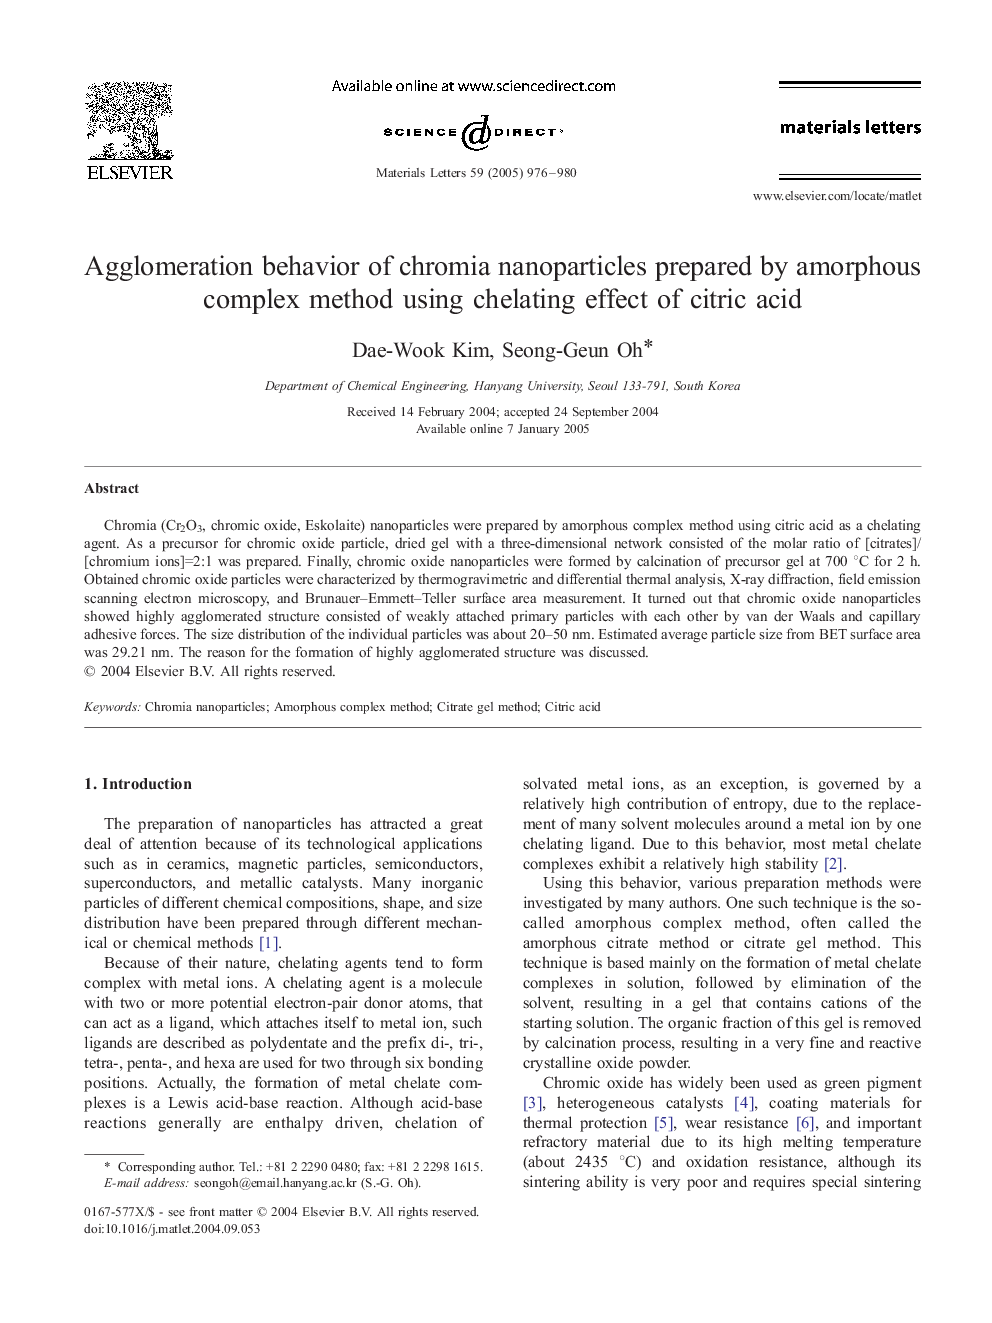 Agglomeration behavior of chromia nanoparticles prepared by amorphous complex method using chelating effect of citric acid